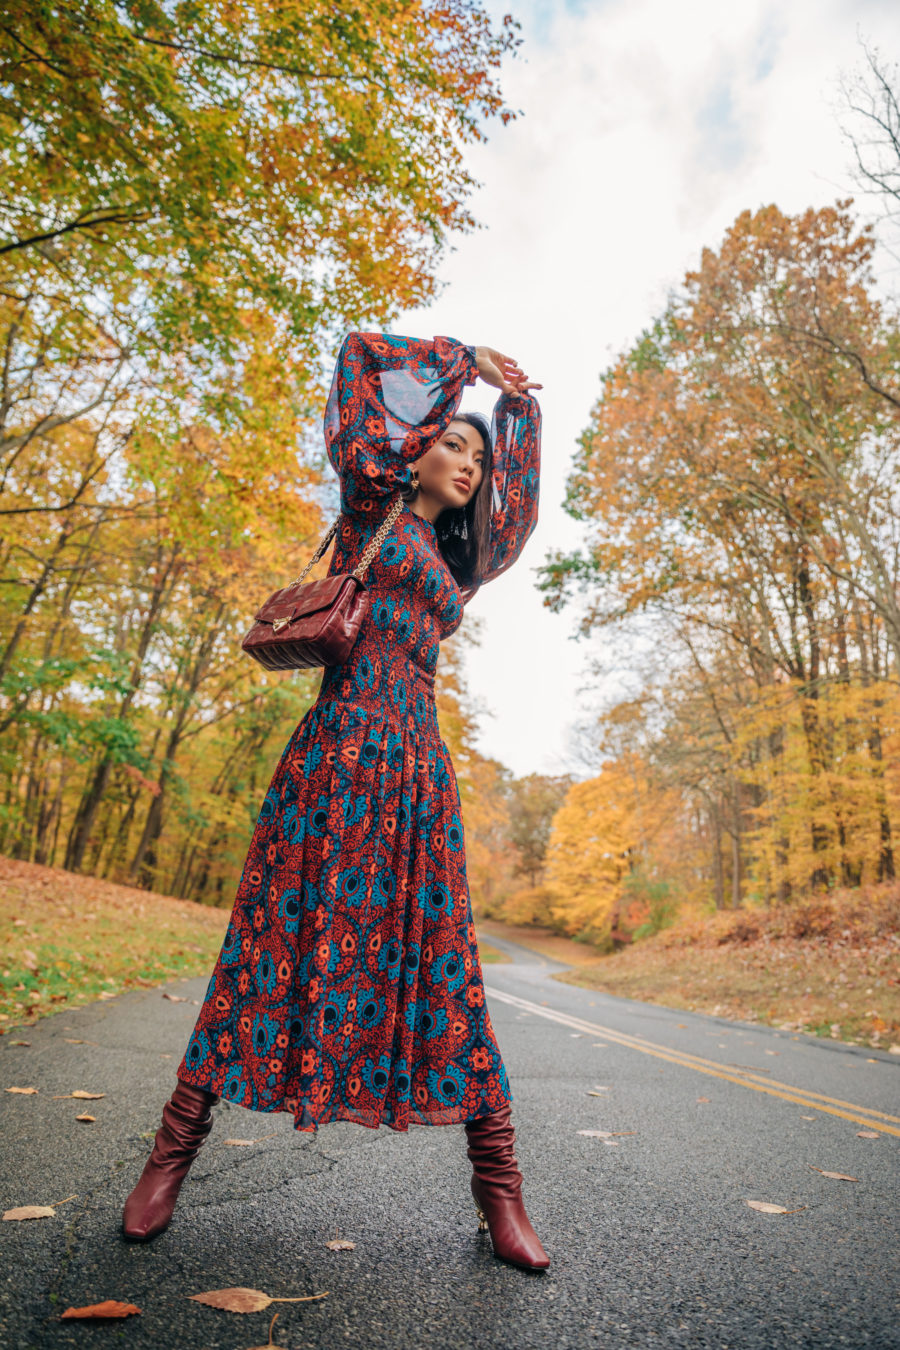 jessica wang wearing a floral dress and maroon boots for a valentine's day outfit // Jessica Wang - Notjessfashion.com